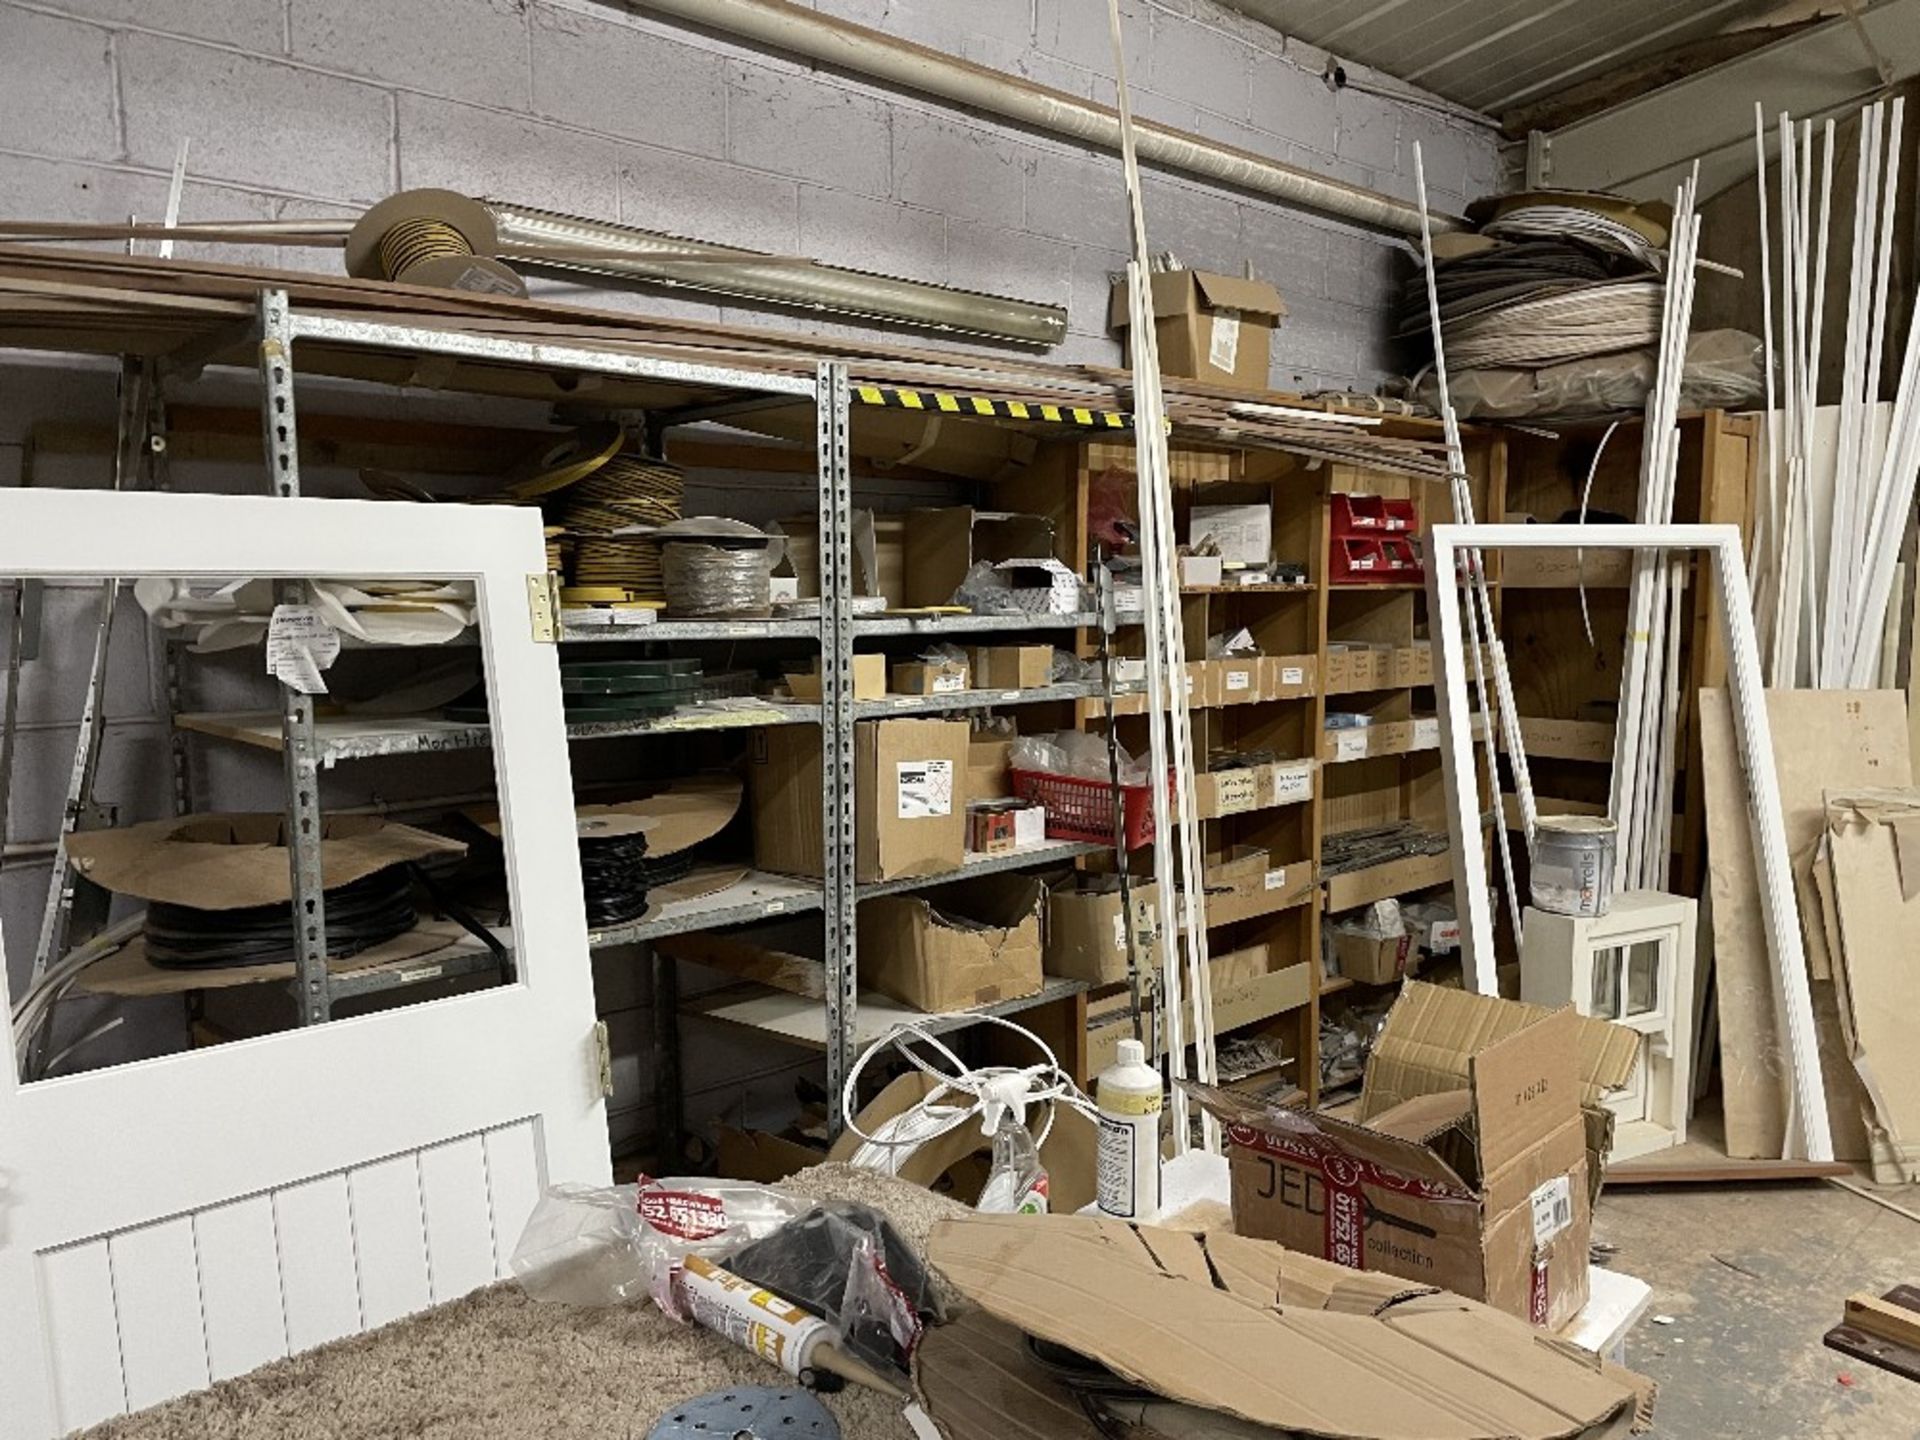 5 x Shelving Units w/ Contents - Contents Incl: Edging Material, Lockings & Hinges